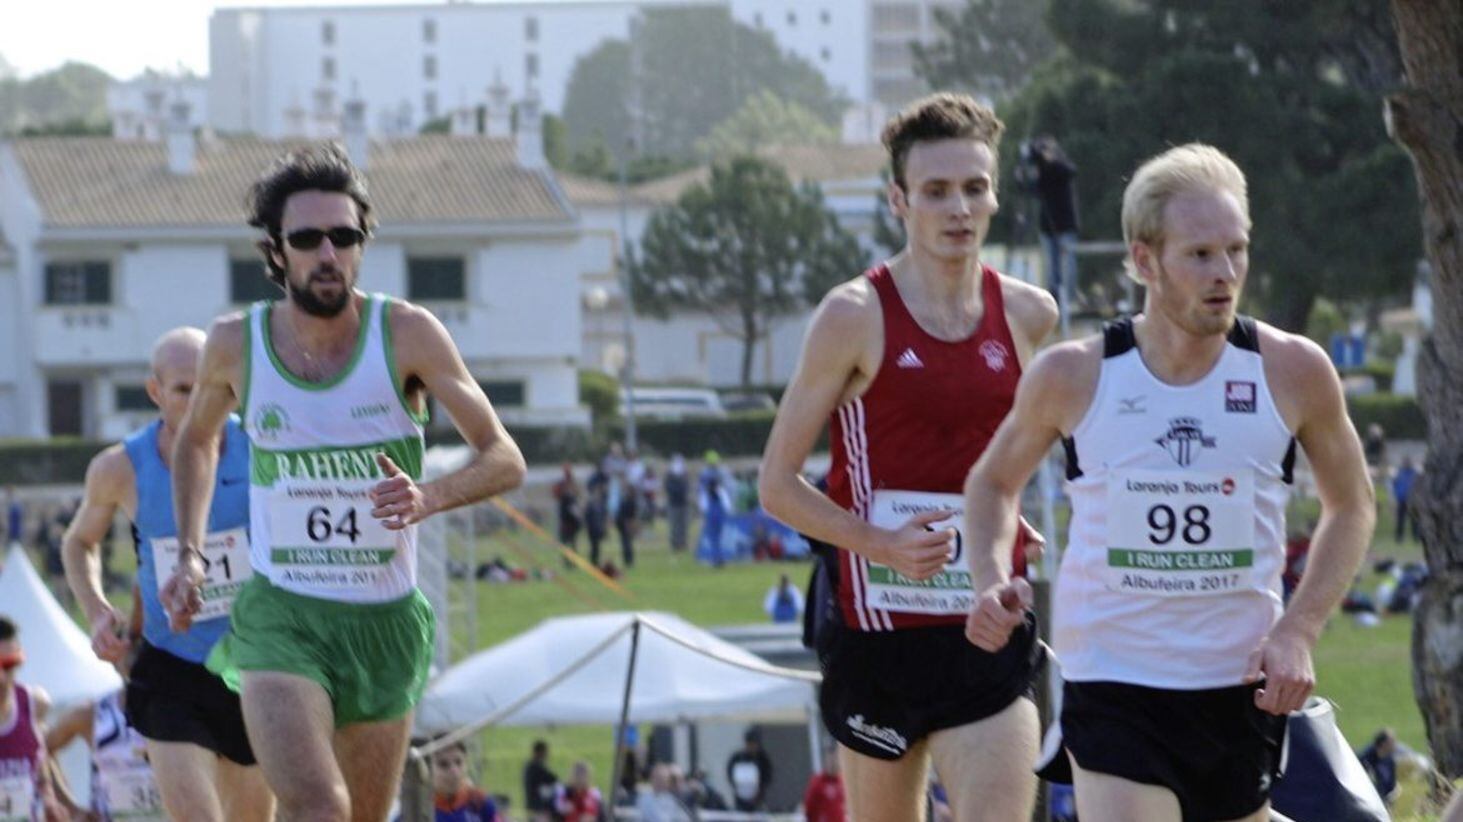 Raheny Shamrock&#39;s Mick Clohisey in action at yesterday&#39;s European Champion Clubs&#39; Cross Country in the Algarve, Portugal 